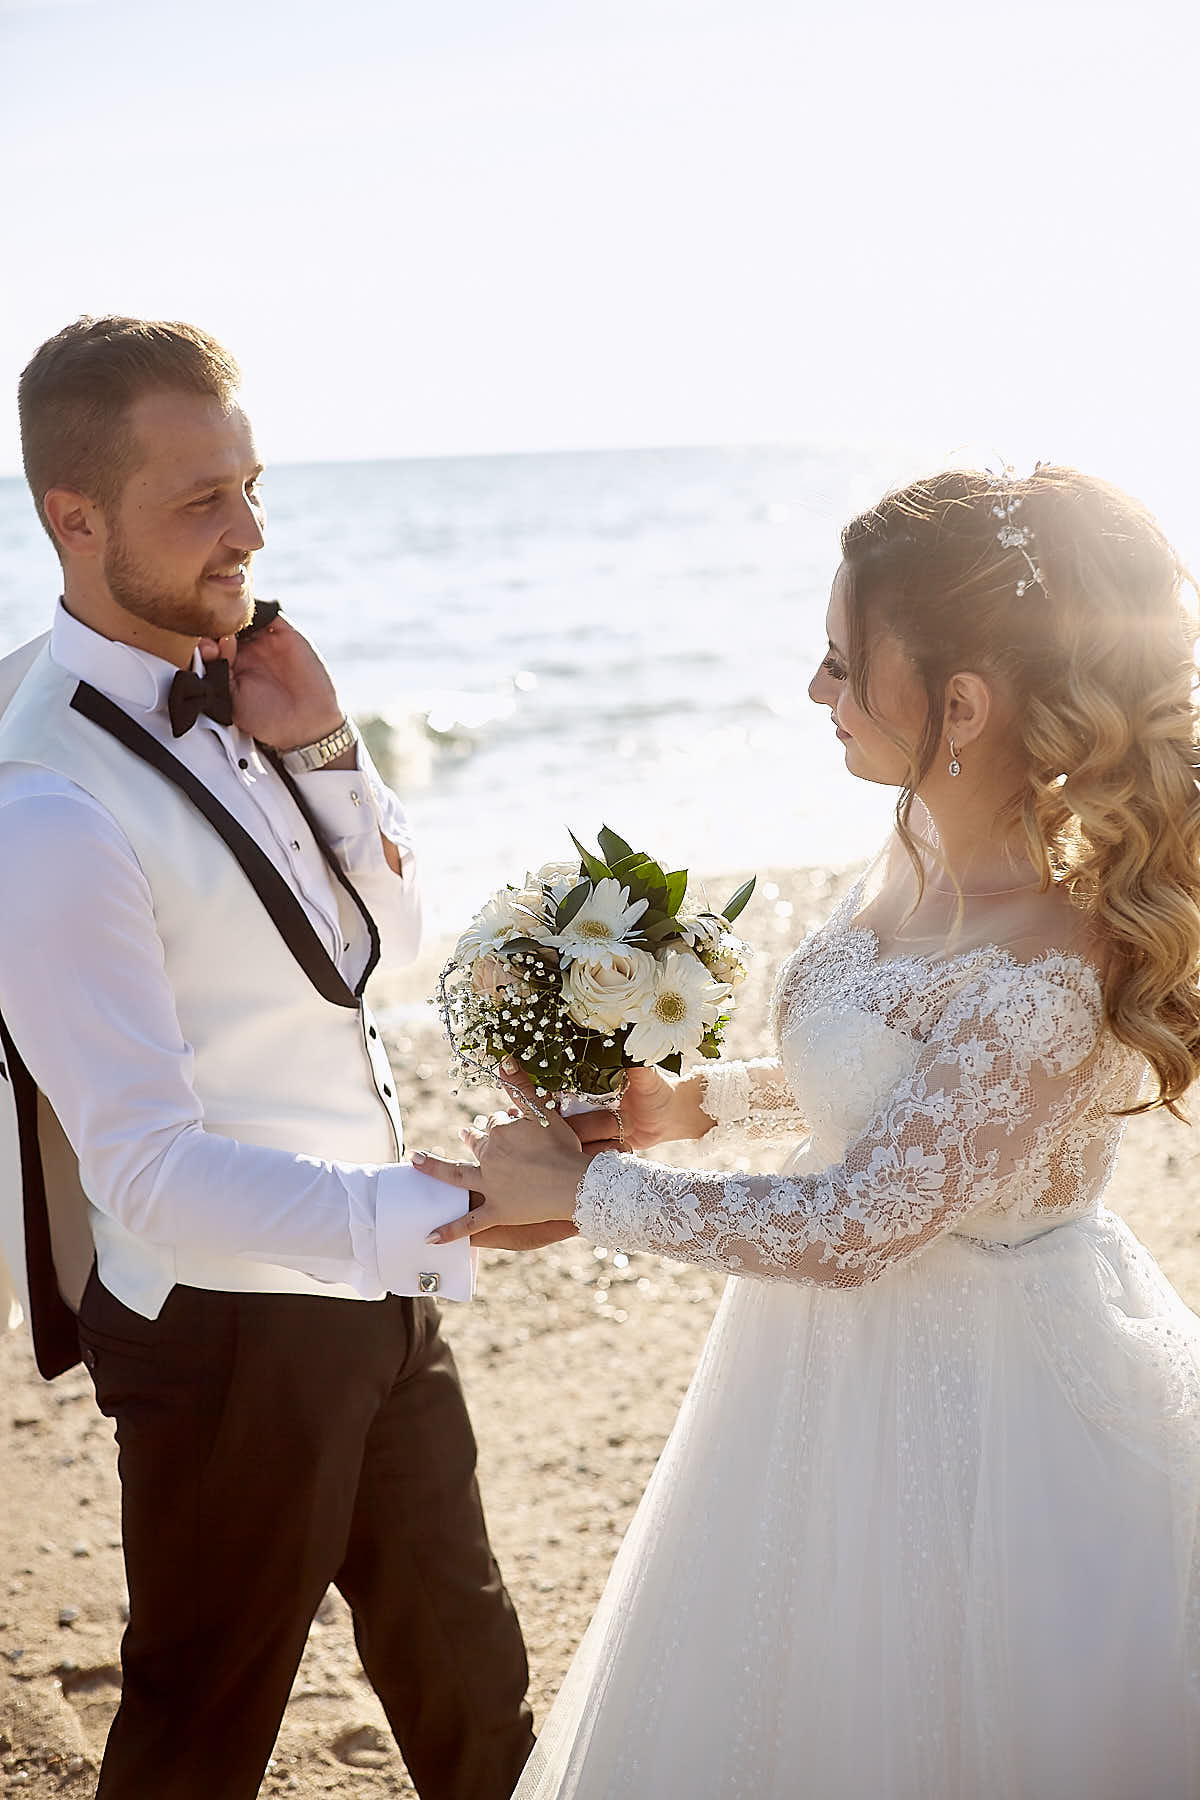 Groom holding the bouquet with his bride while looking at her